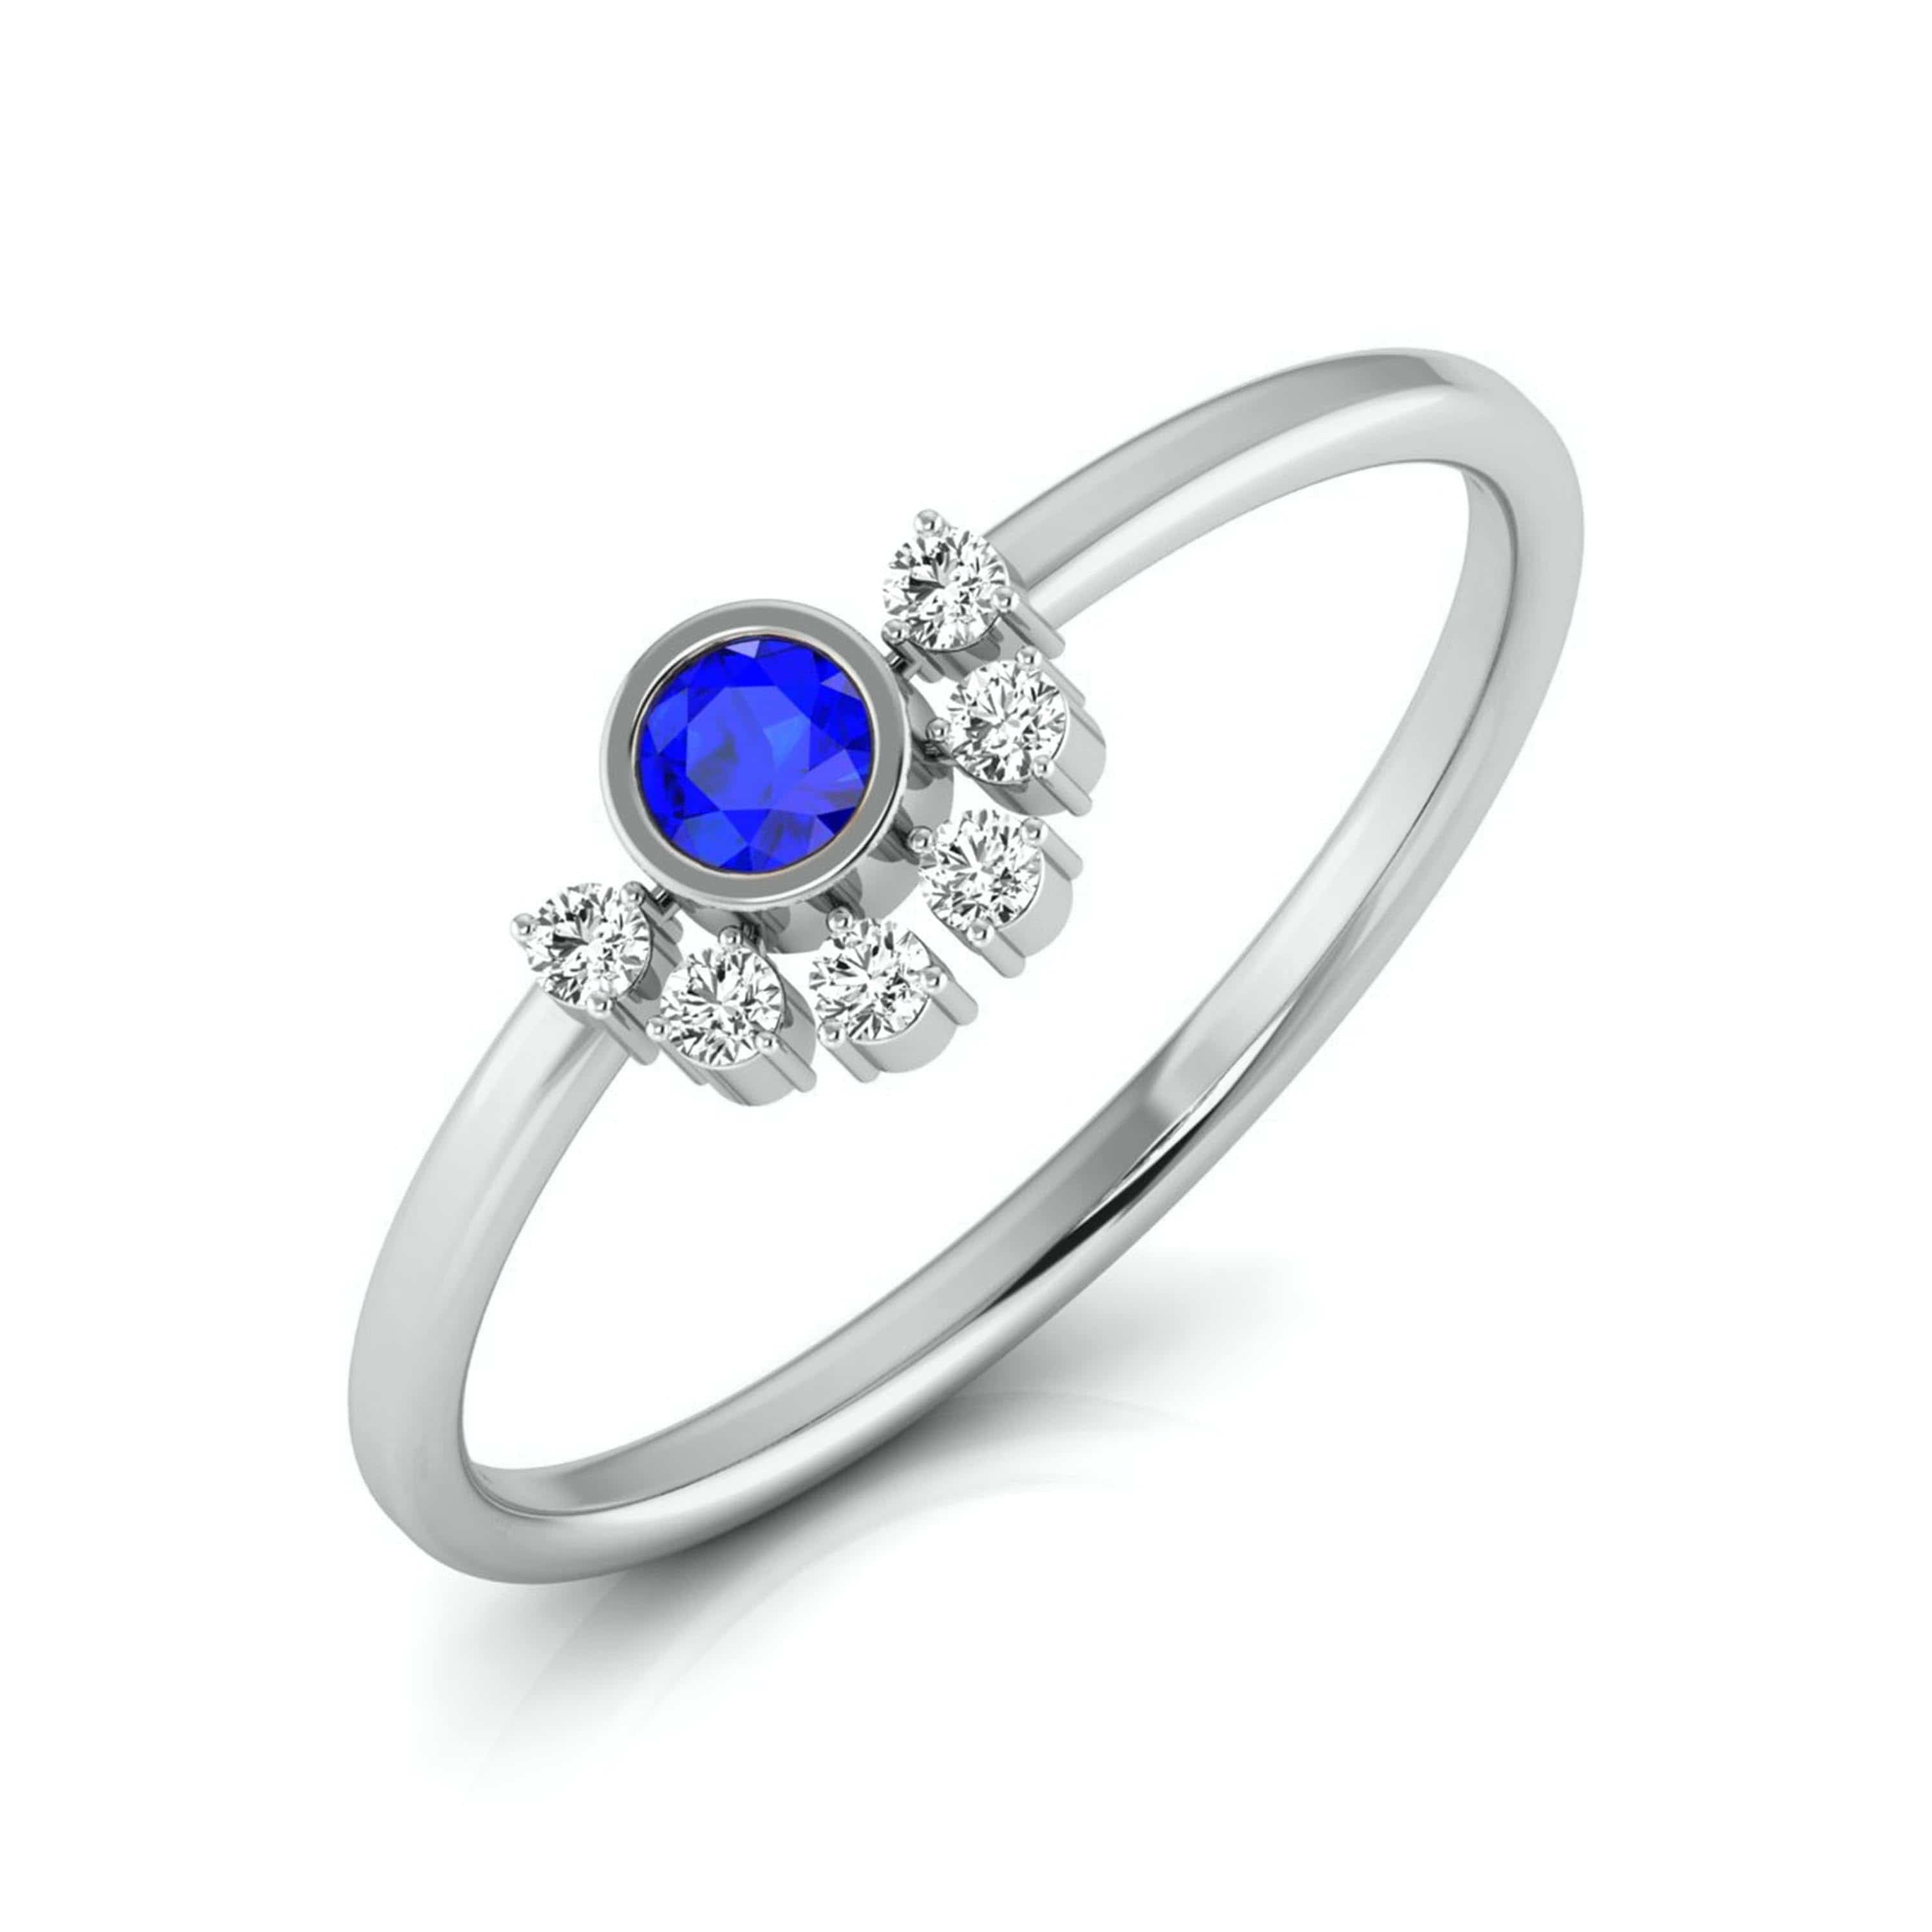 Pear shaped sapphire engagement ring vintage sapphire jewelry twisted –  WILLWORK JEWELRY